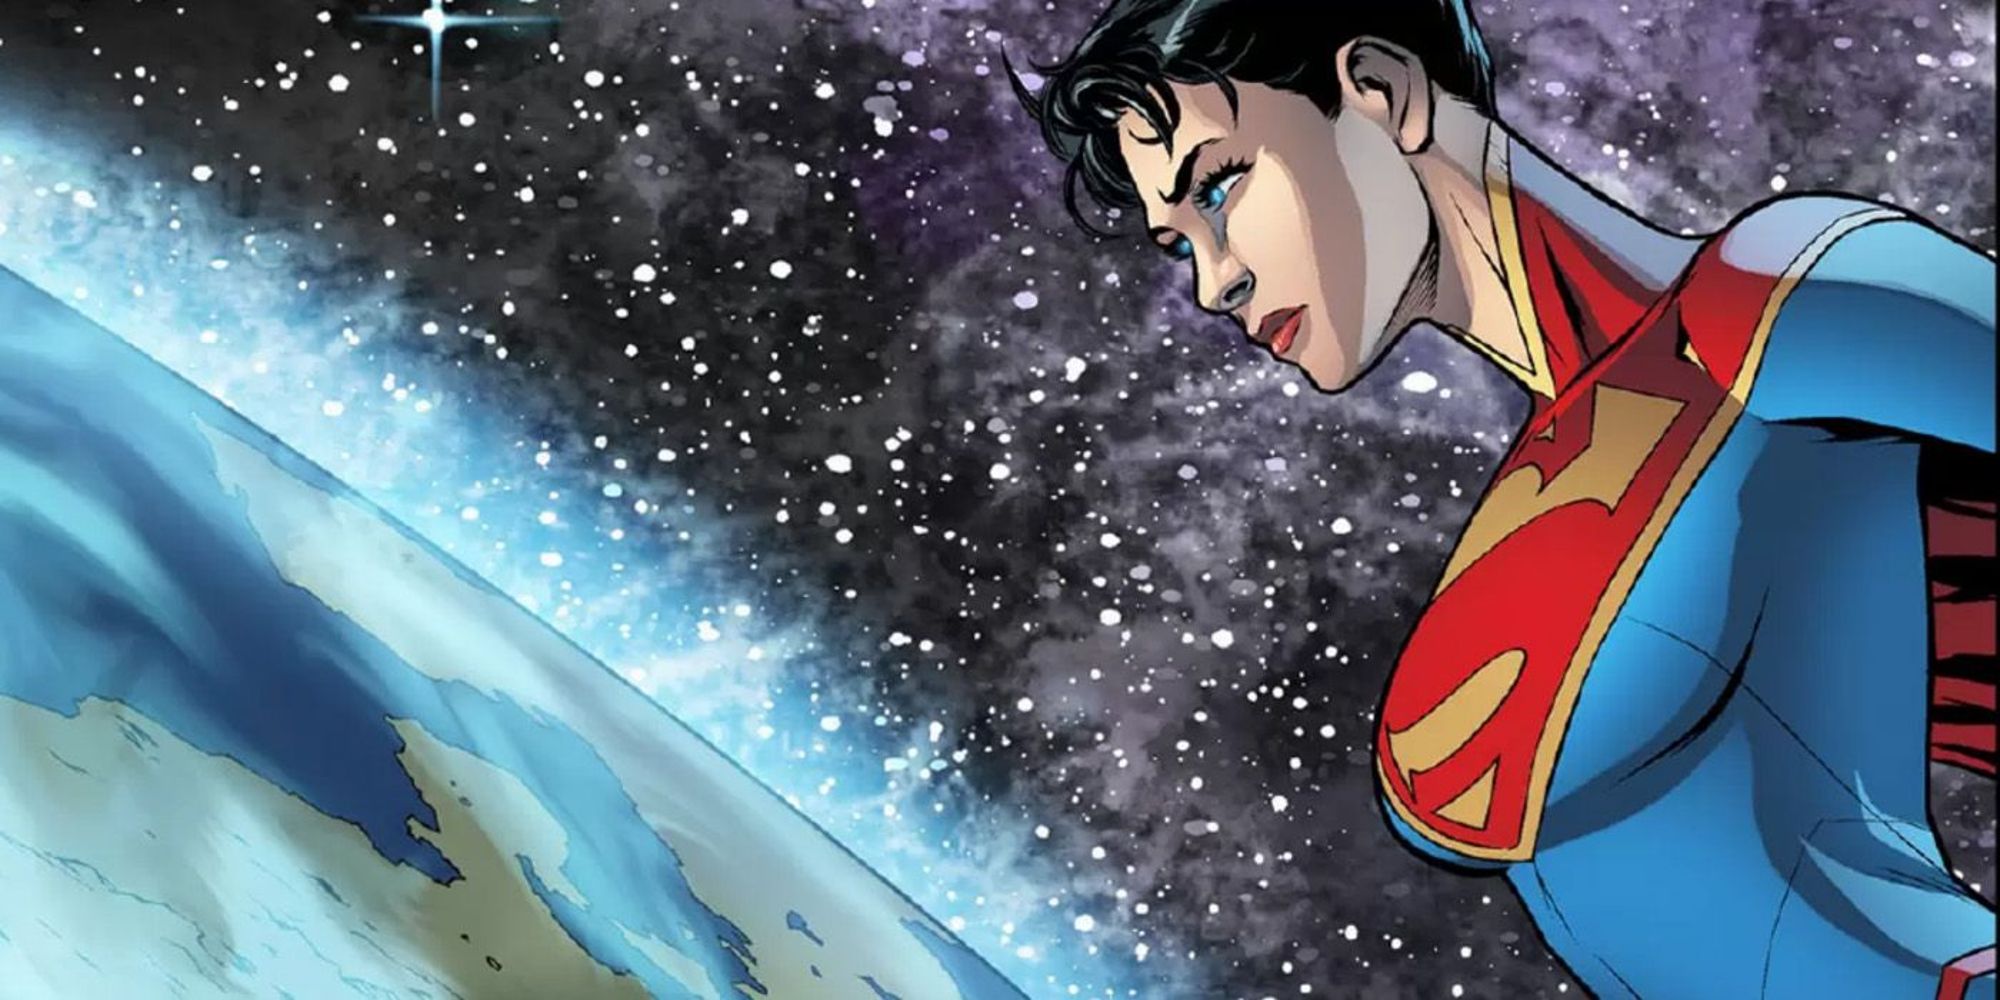 Lara Lane Kent as Supergirl overlooking the Earth in Injustice Gods Among Us comics